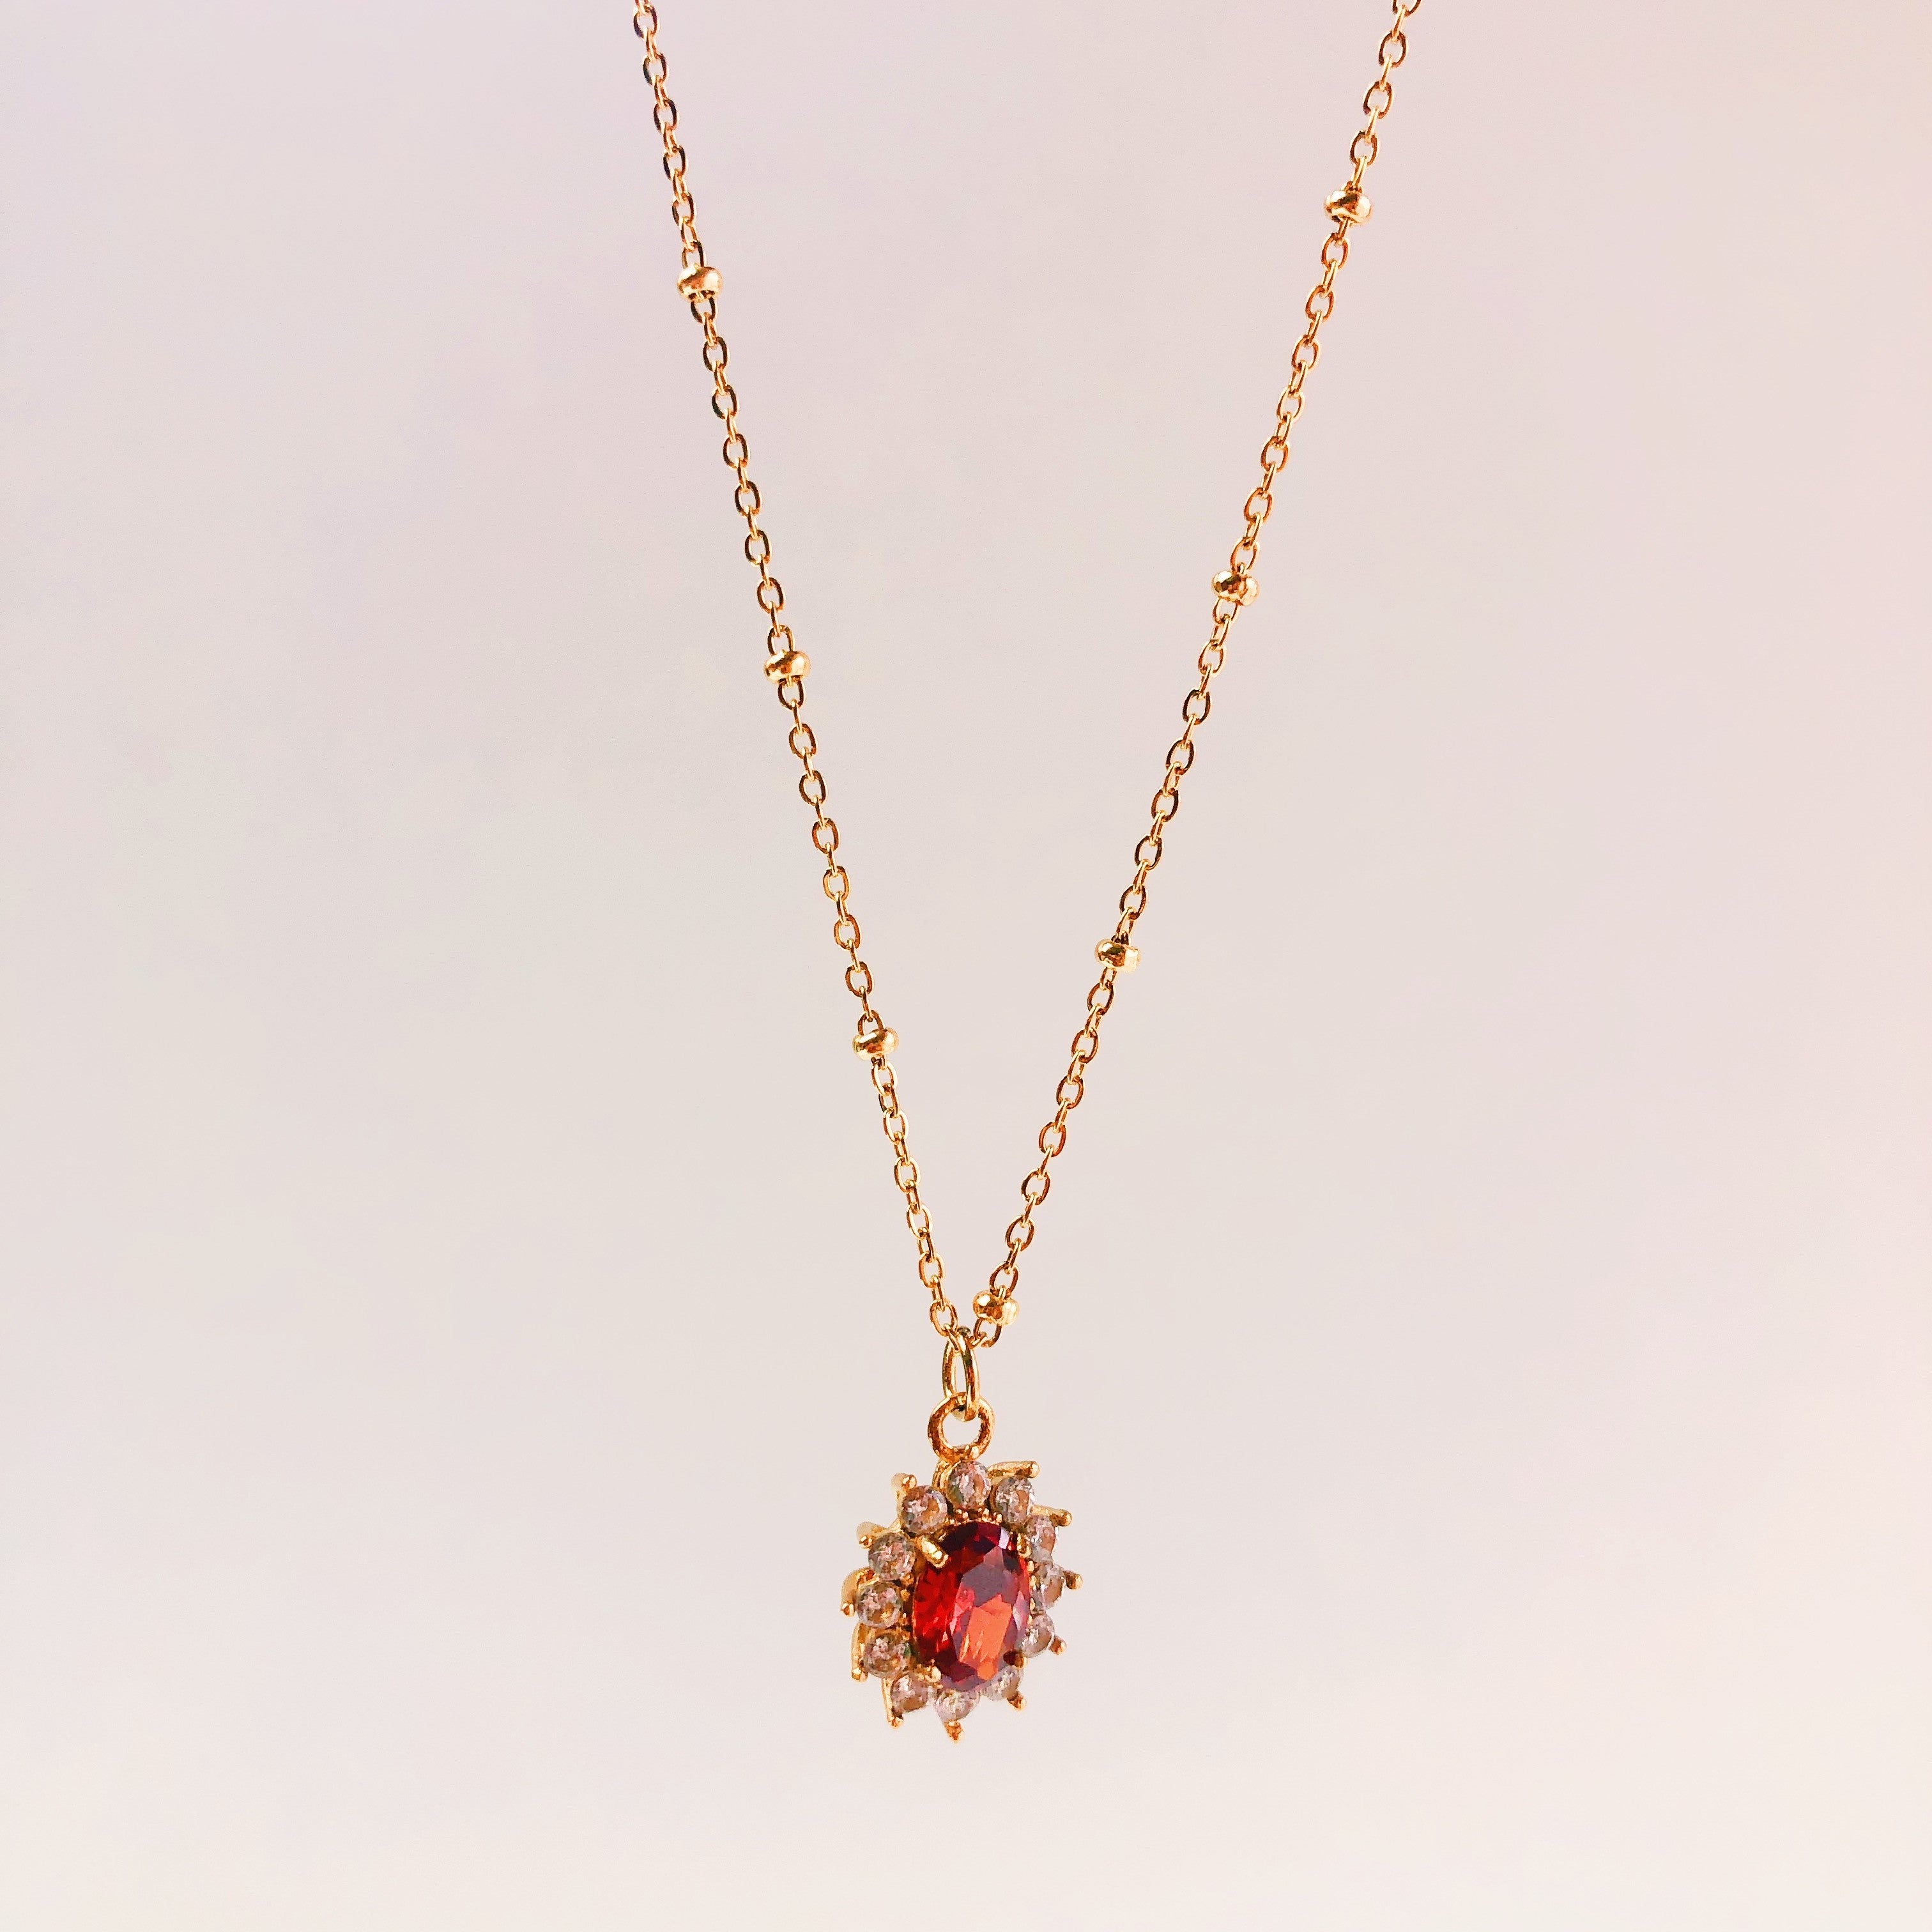 Necklace royal stone red